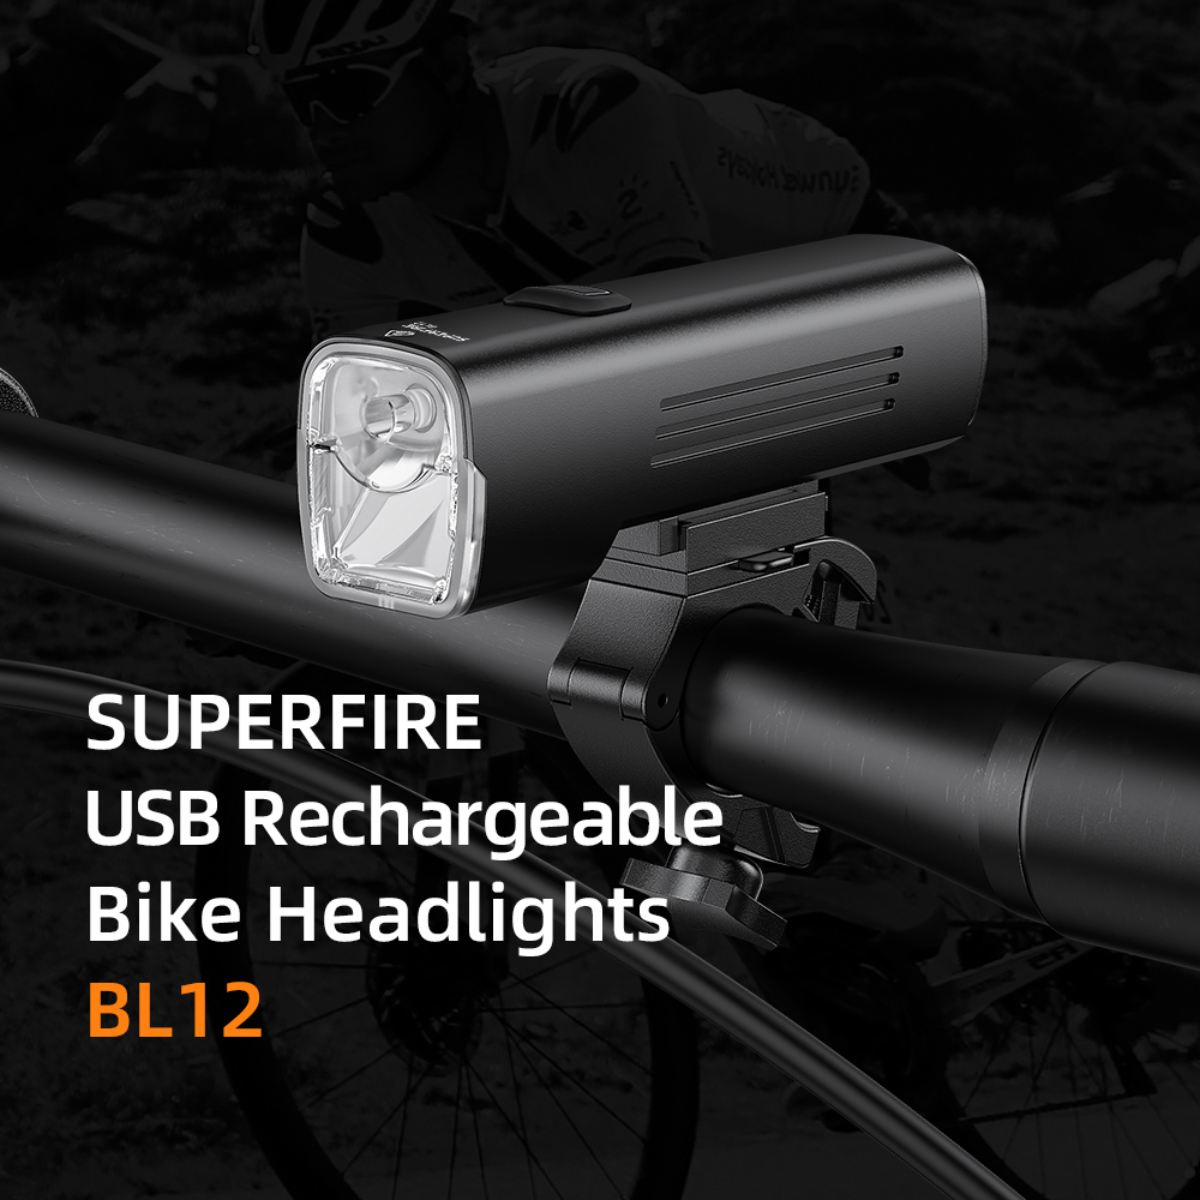 SUPERFIRE Headlights Increase Riding Safety & Visibility